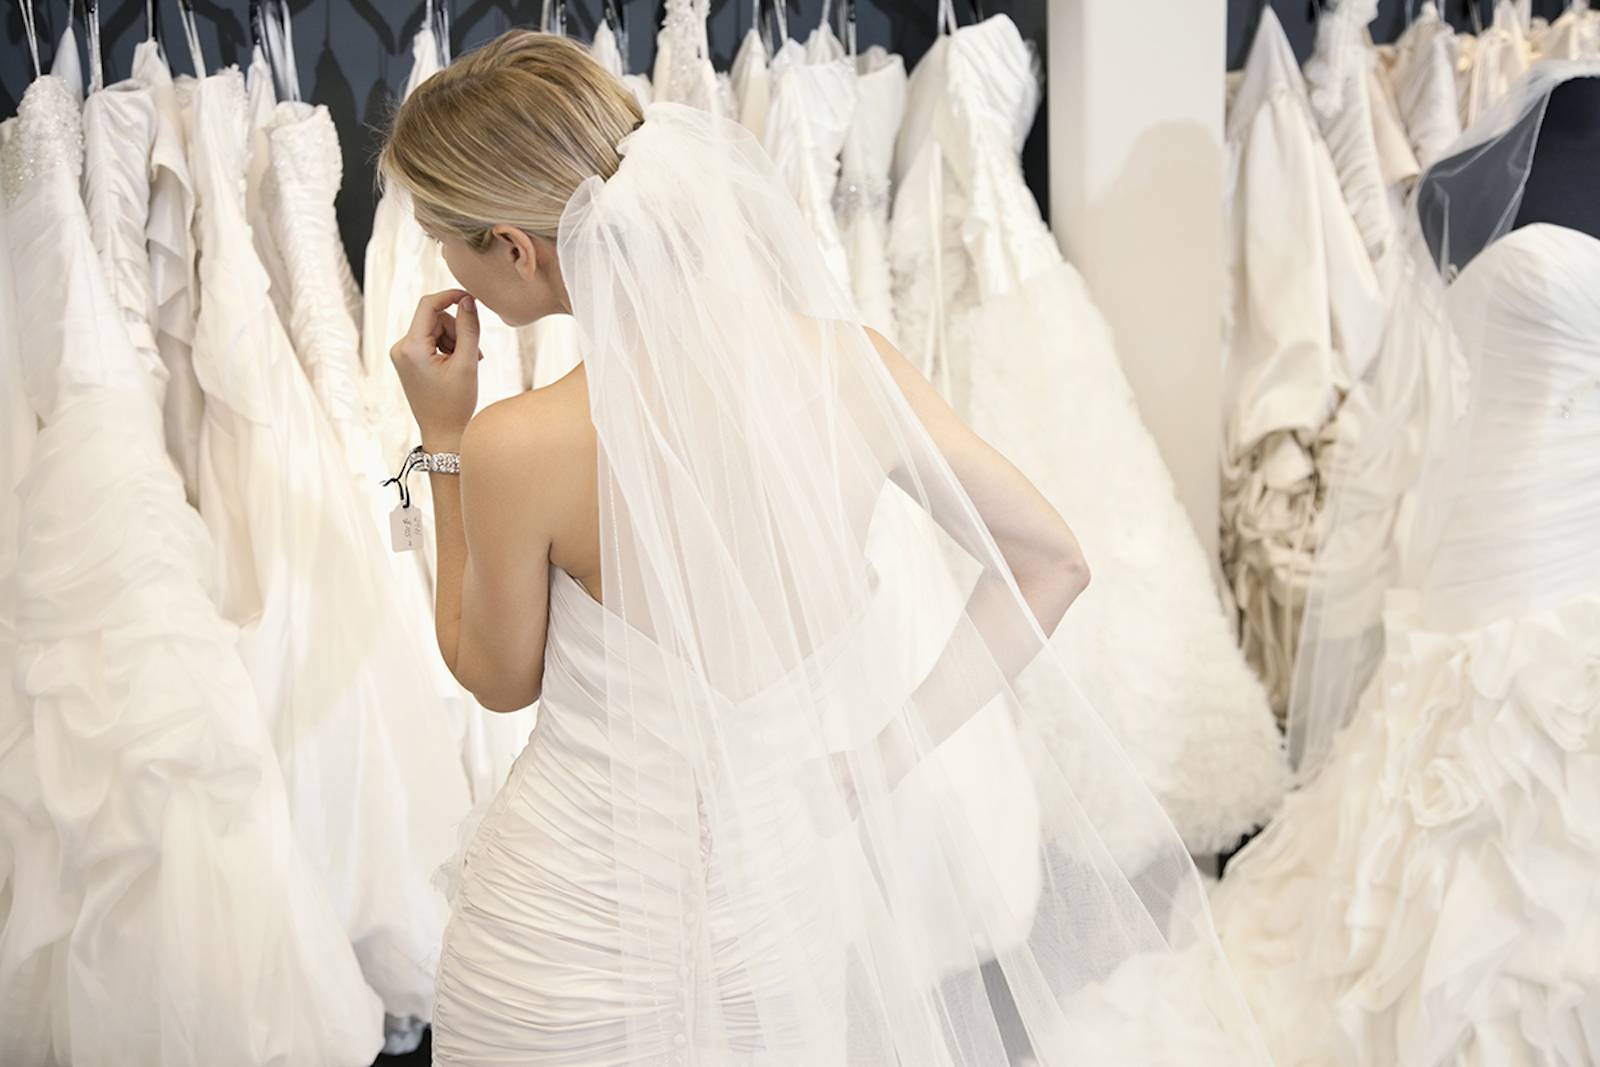 Buying a Sample Sale Gown at Geny’s |  Nashville Bridal Fashion